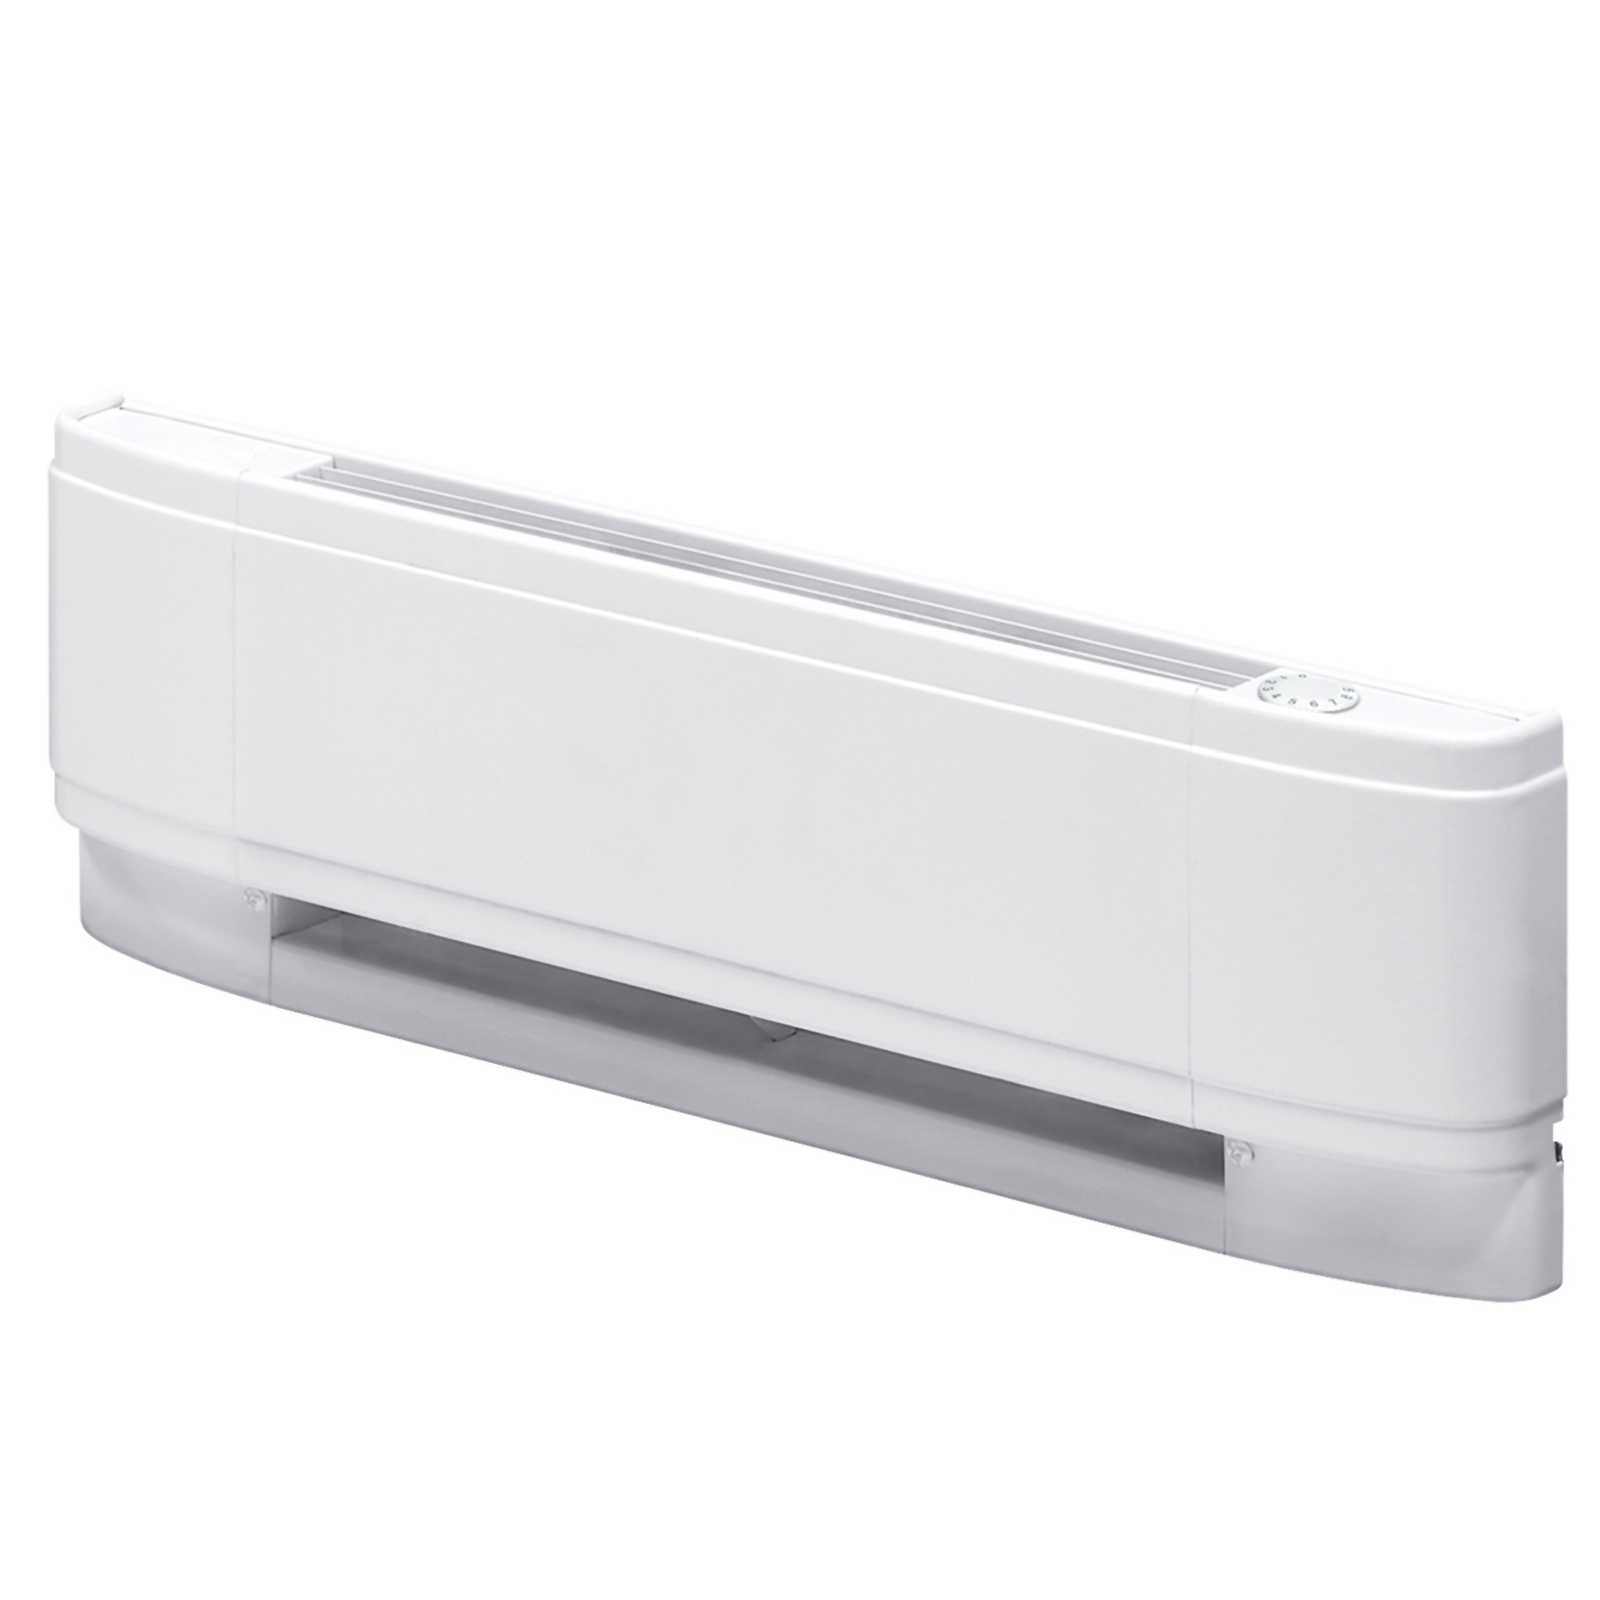 Dimplex LC4015W31 40" Electromode Convection Baseboard Heater